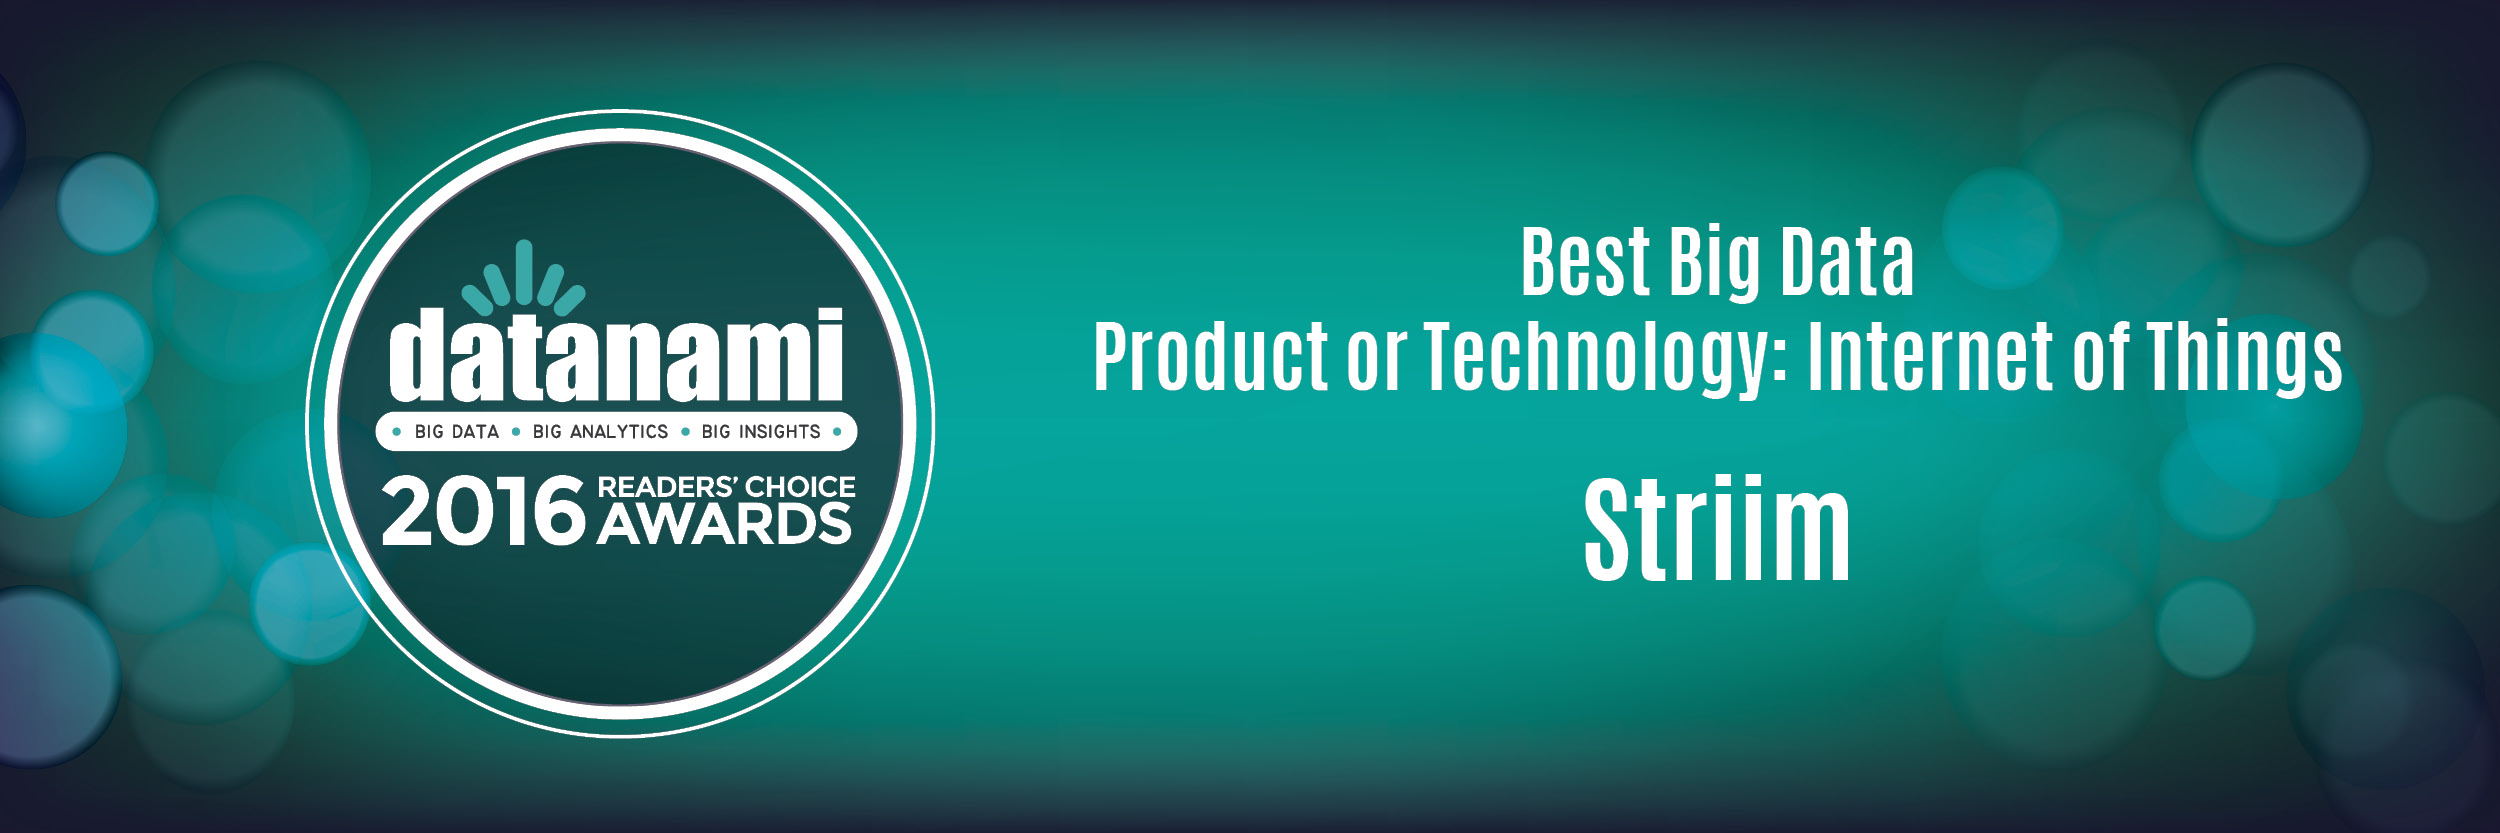 Striim Wins Datanami Readers' Choice Award for Best Big Data Product or Technology: Internet of Things